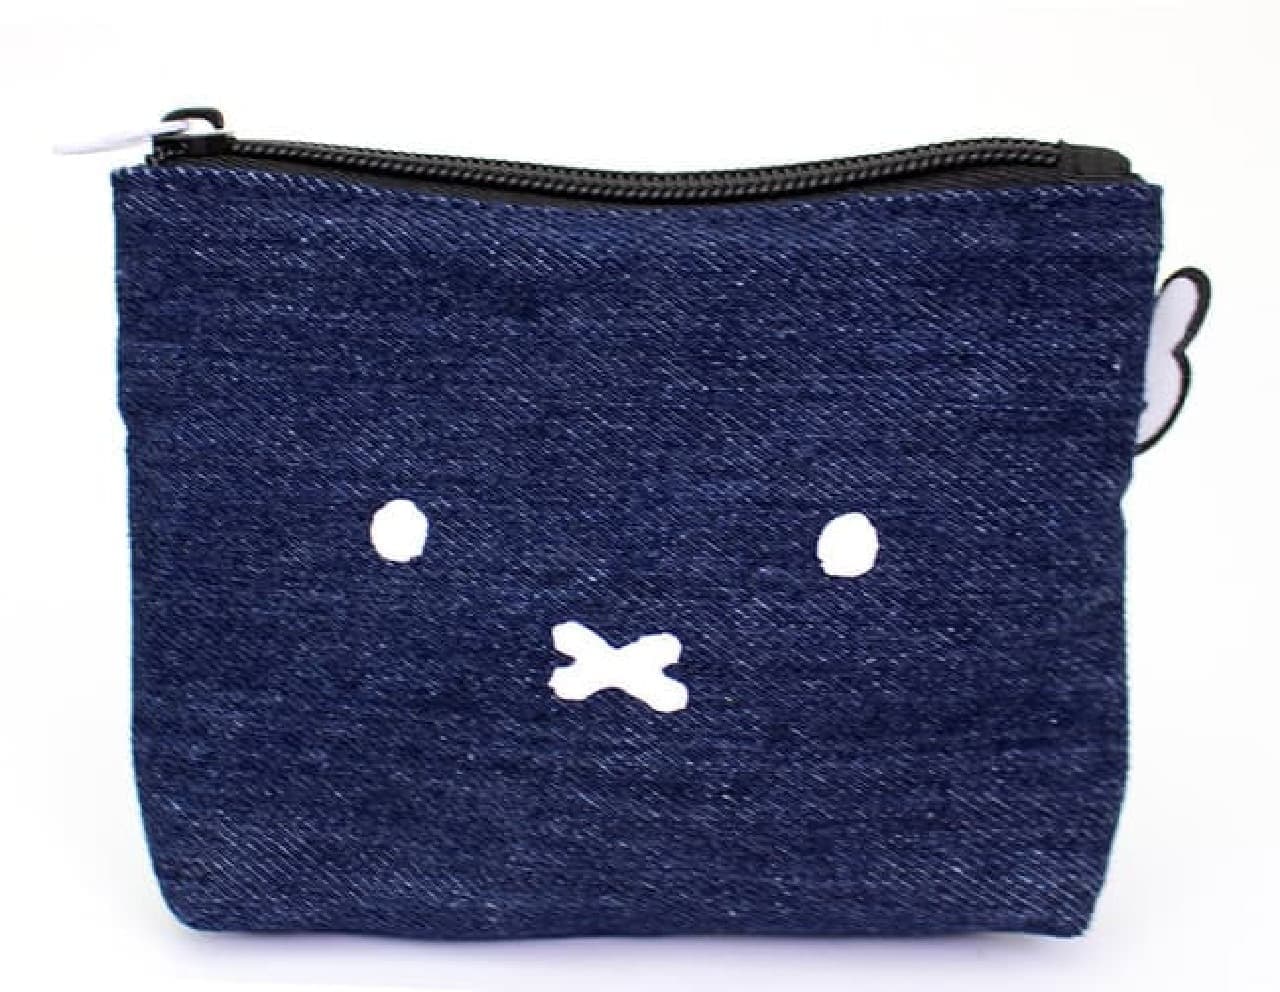 Miffy Tote Bag at Villeurban -- 2-way canvas pouch that can also be used as a shoulder bag